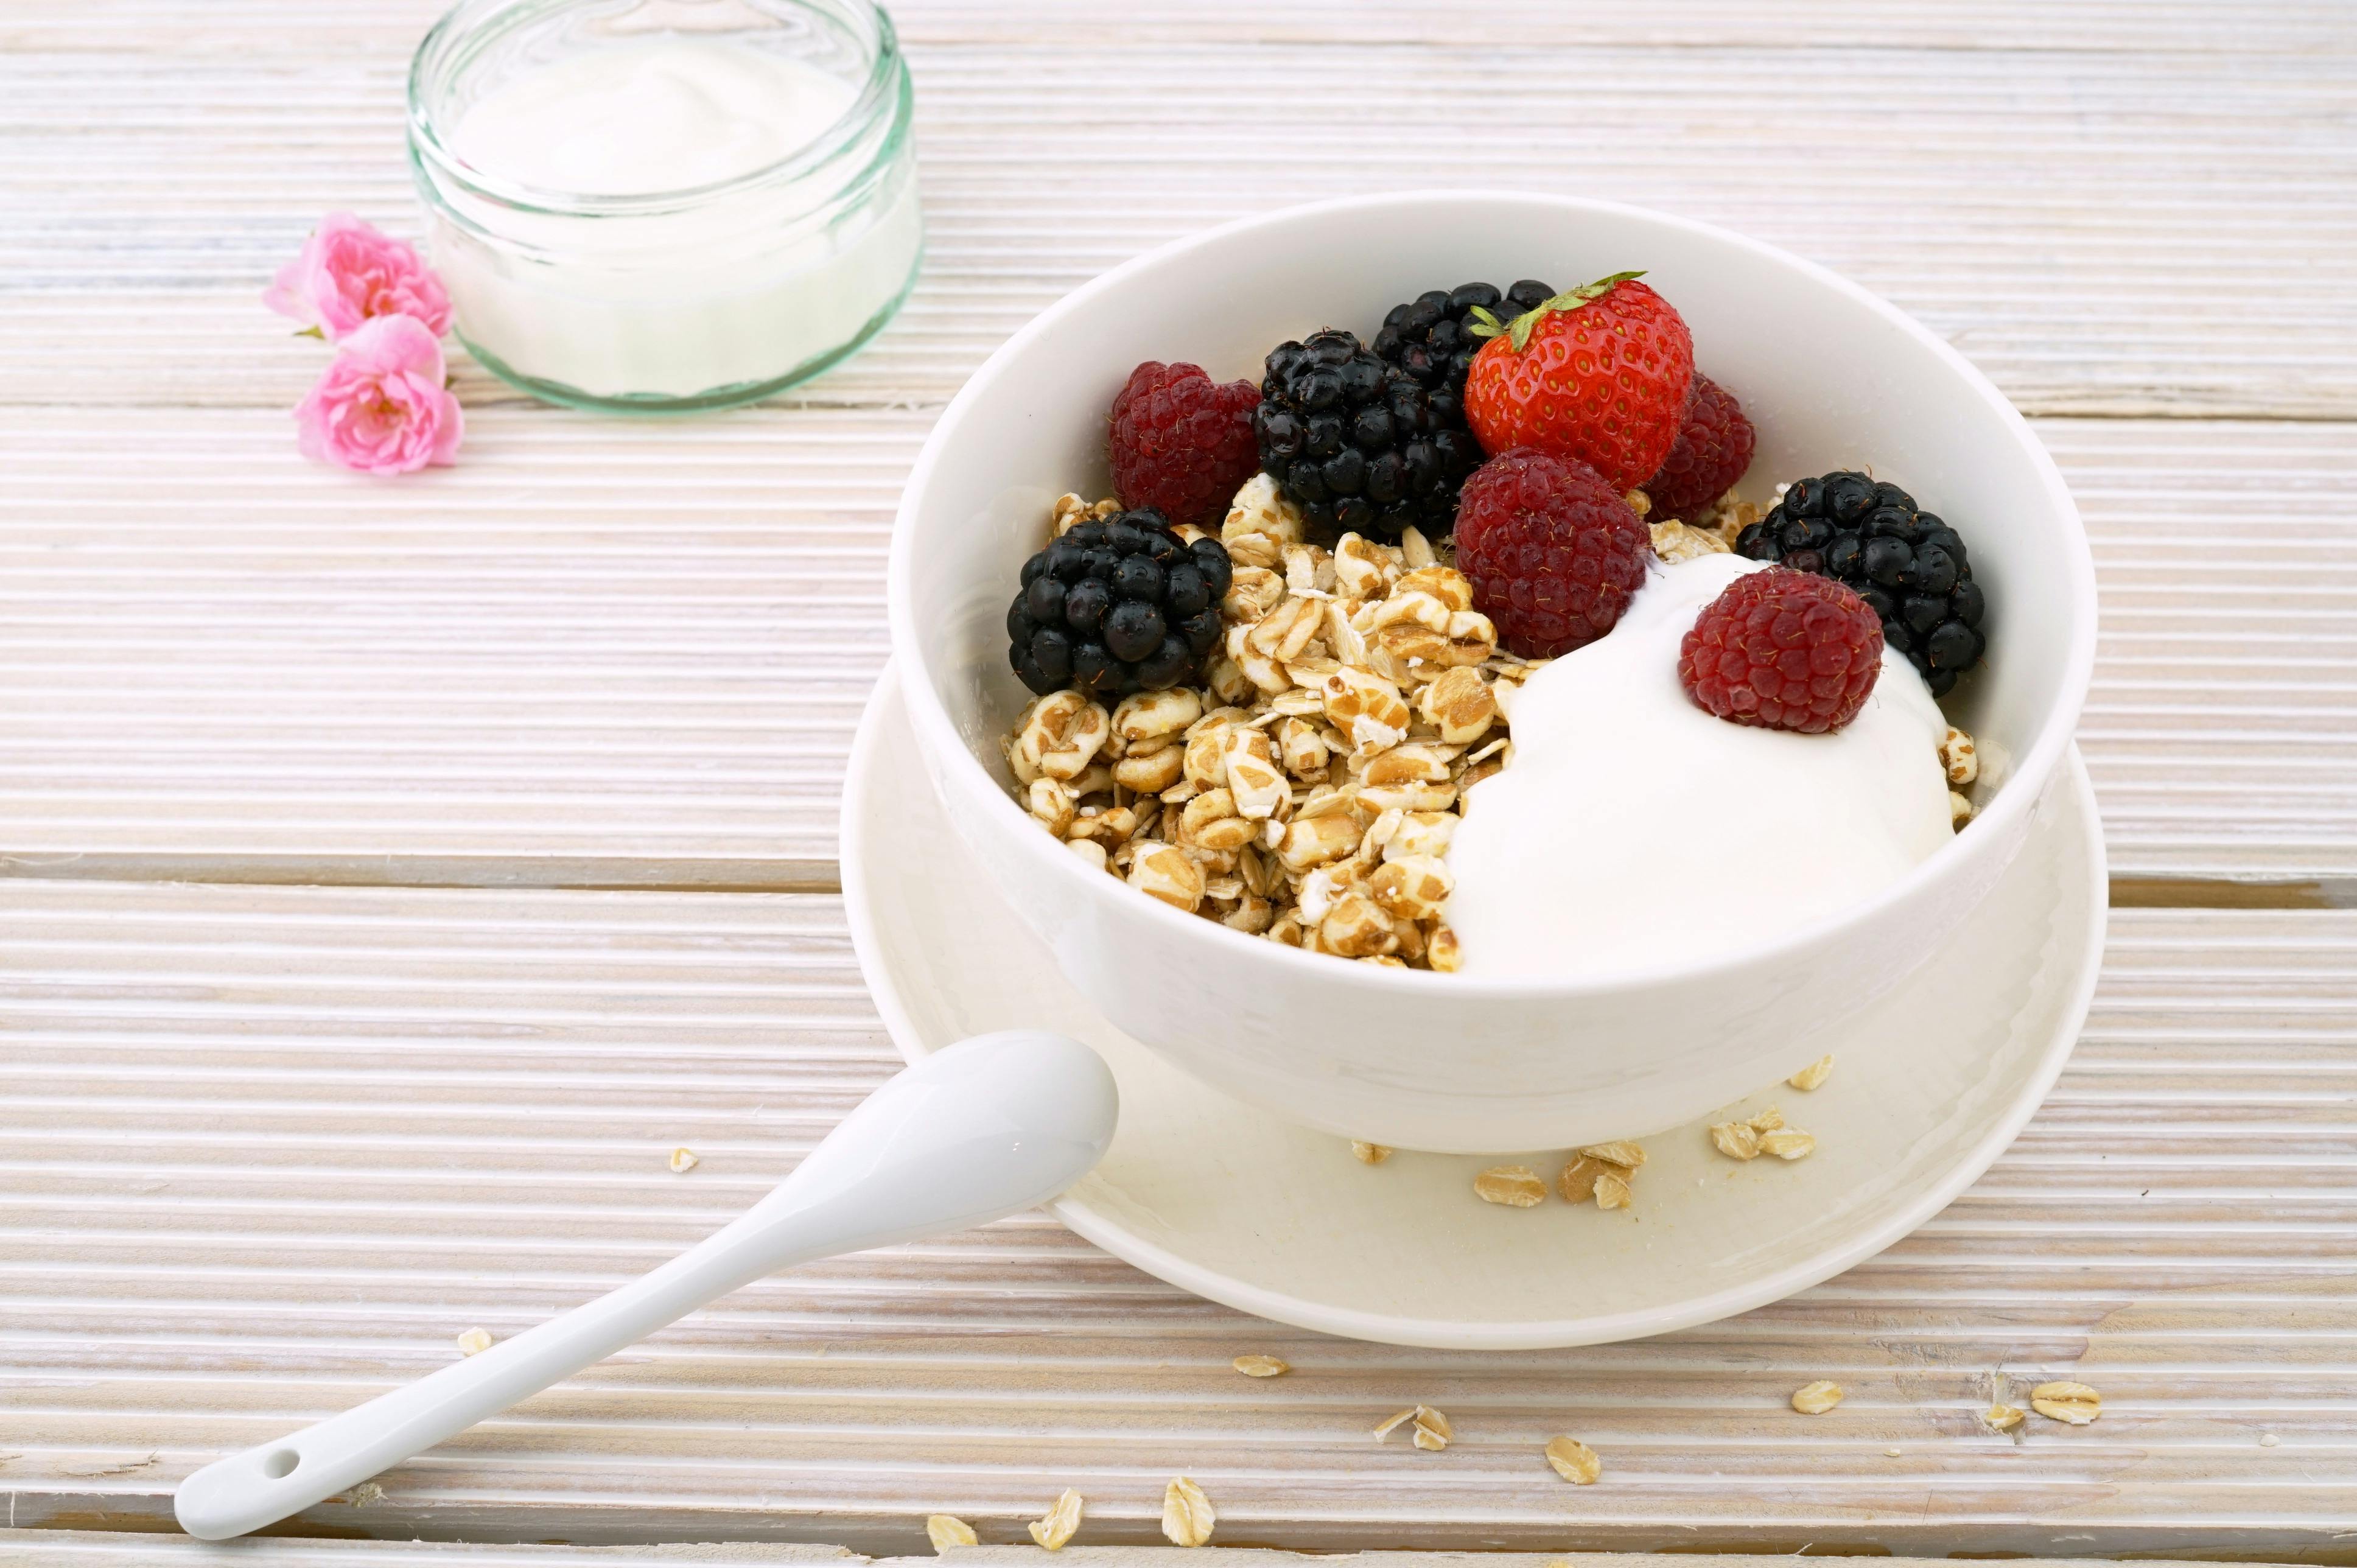 Oats have healthy carbohydrates great for people with COPD.